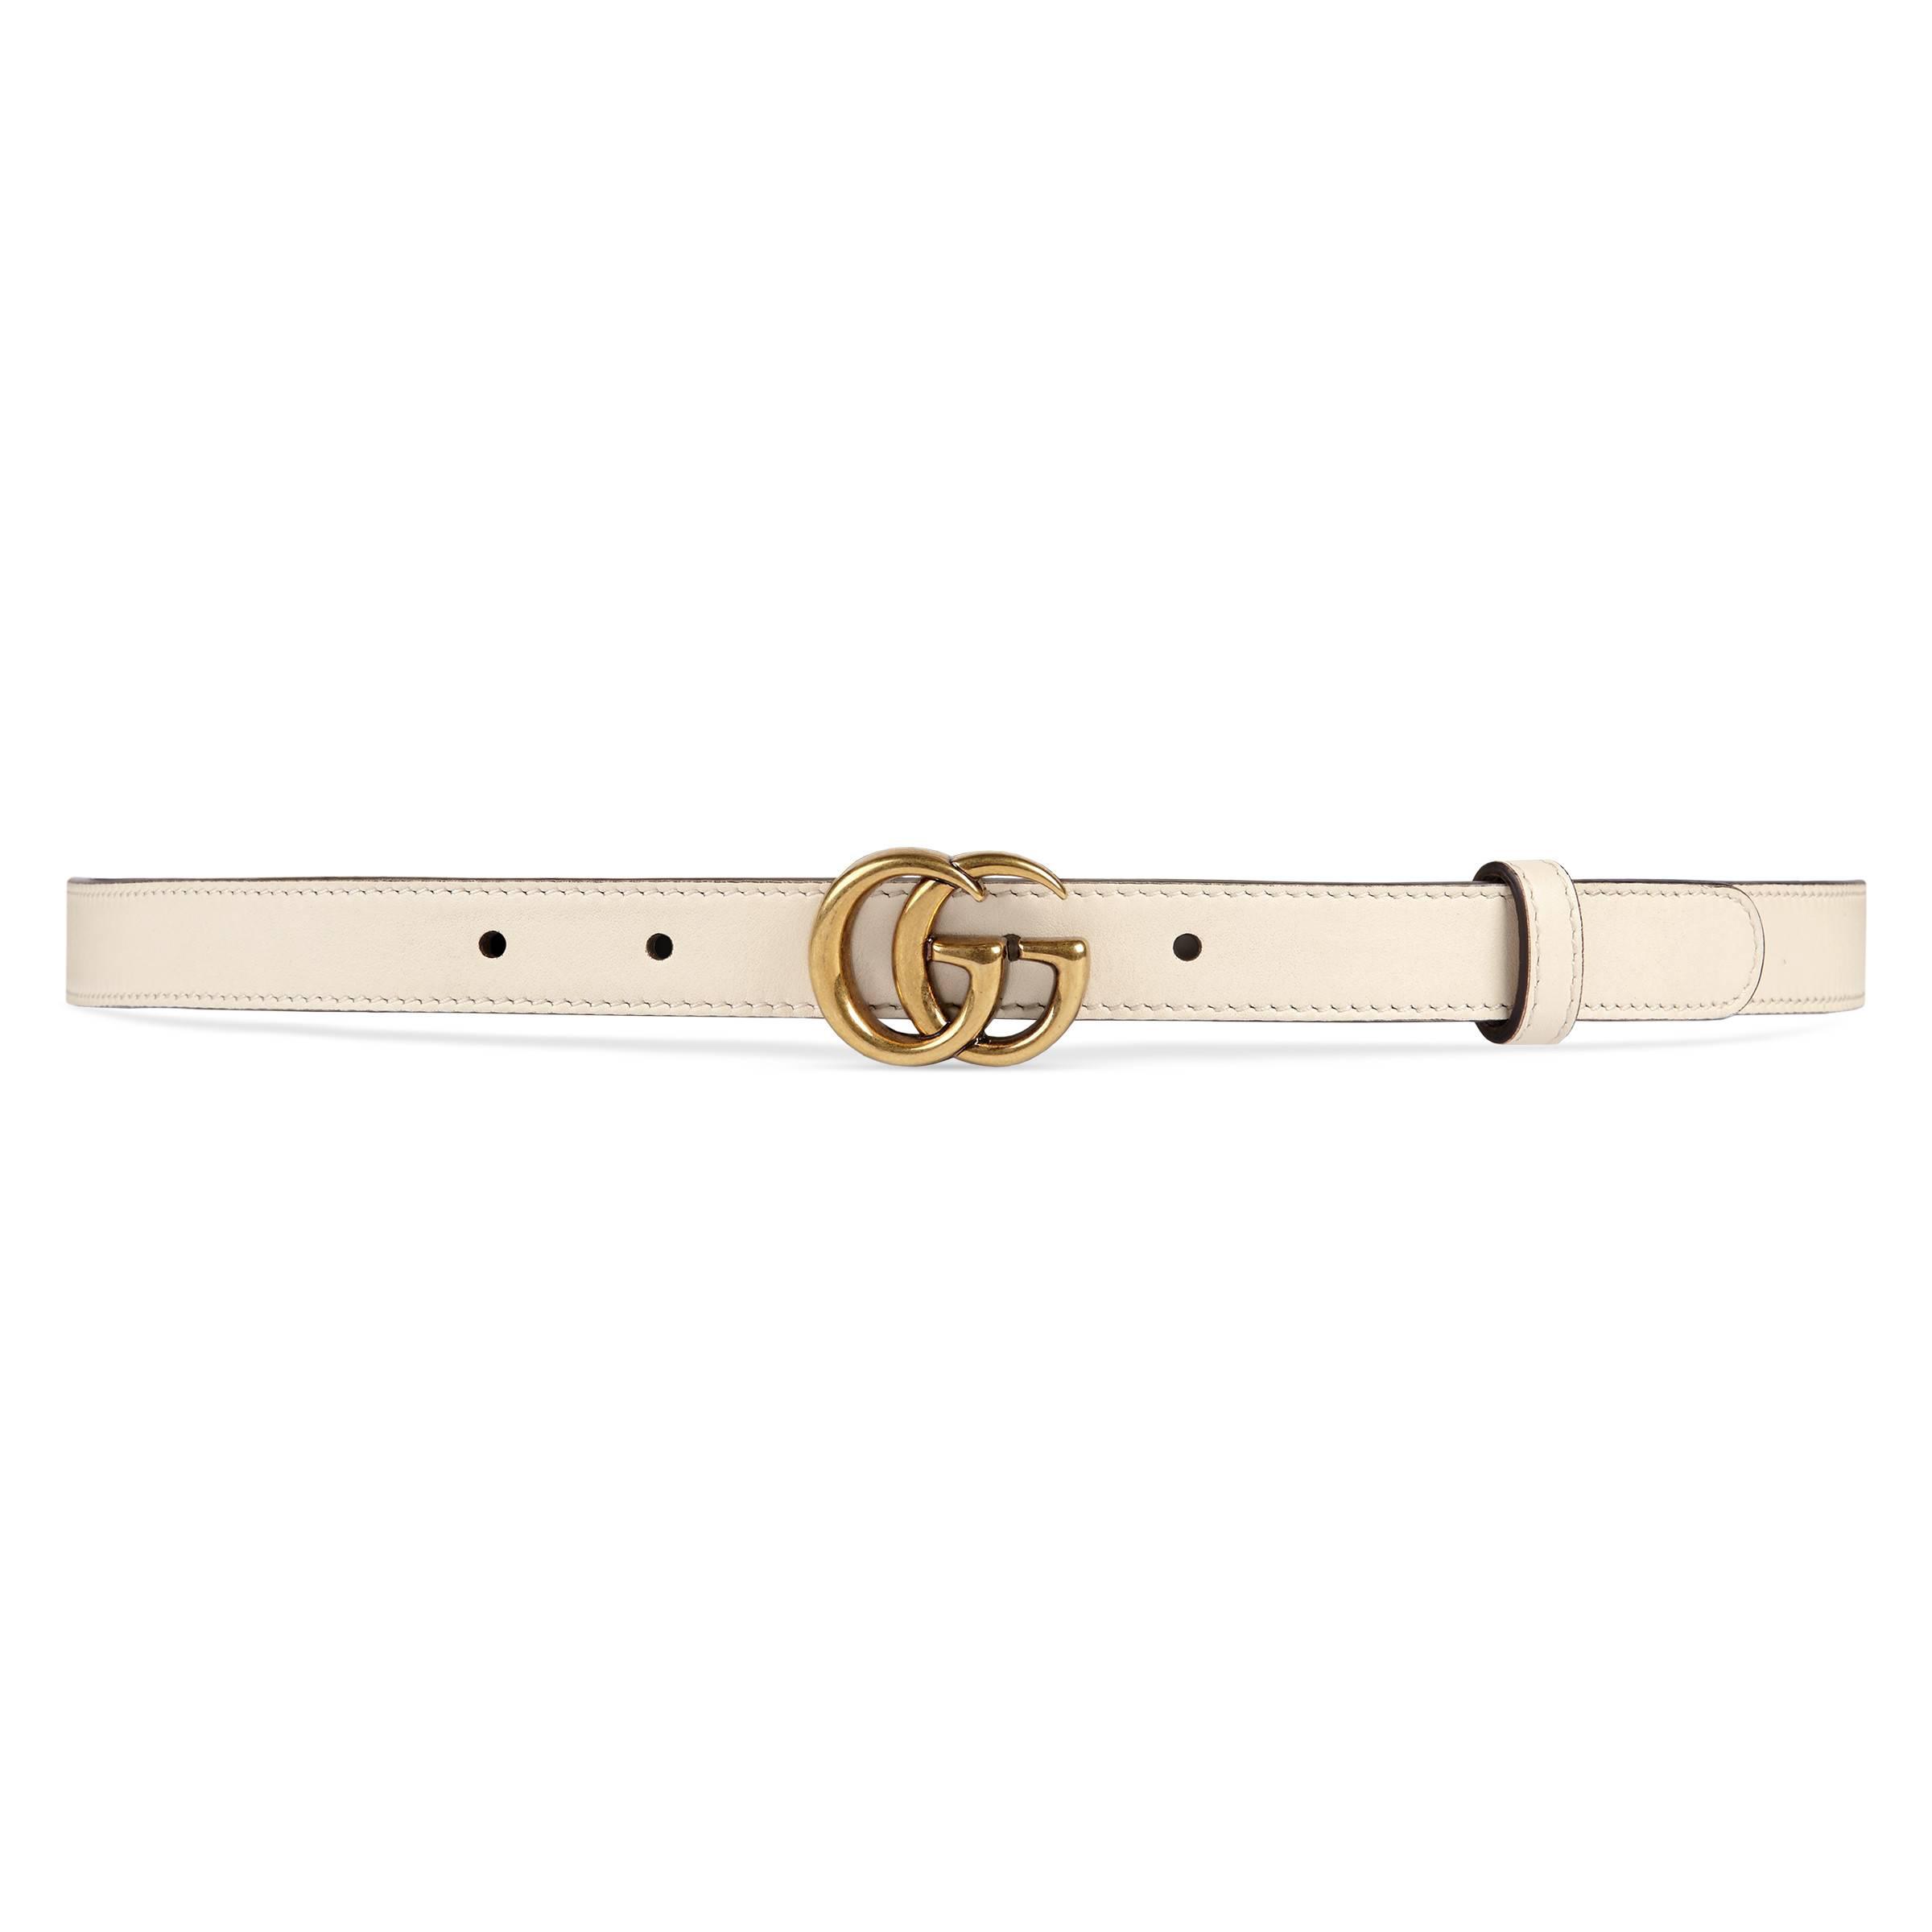 Lyst - Gucci Leather Belt With Double G Buckle in White